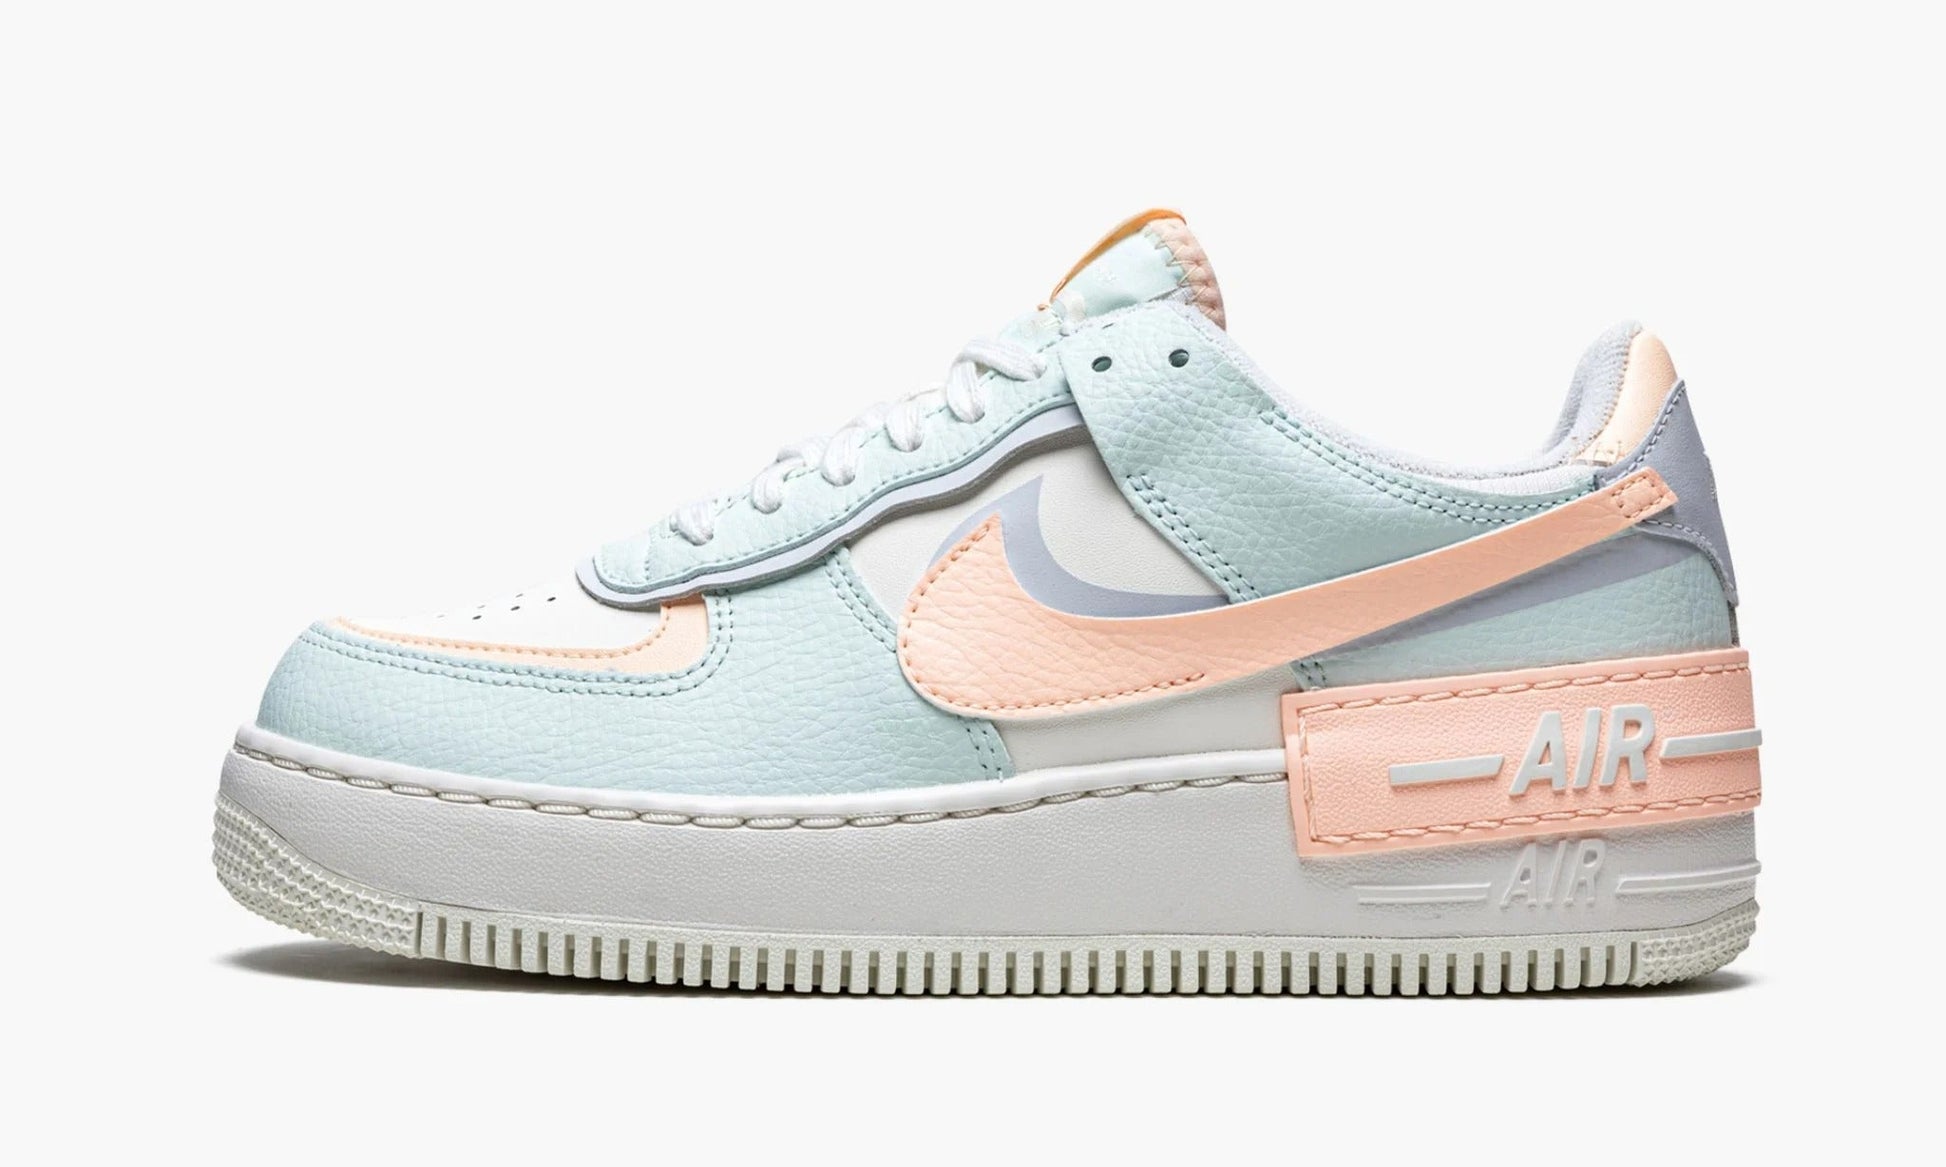 Air Force 1 Low Shadow WMNS “Sail Barely Green” - CU8591 104